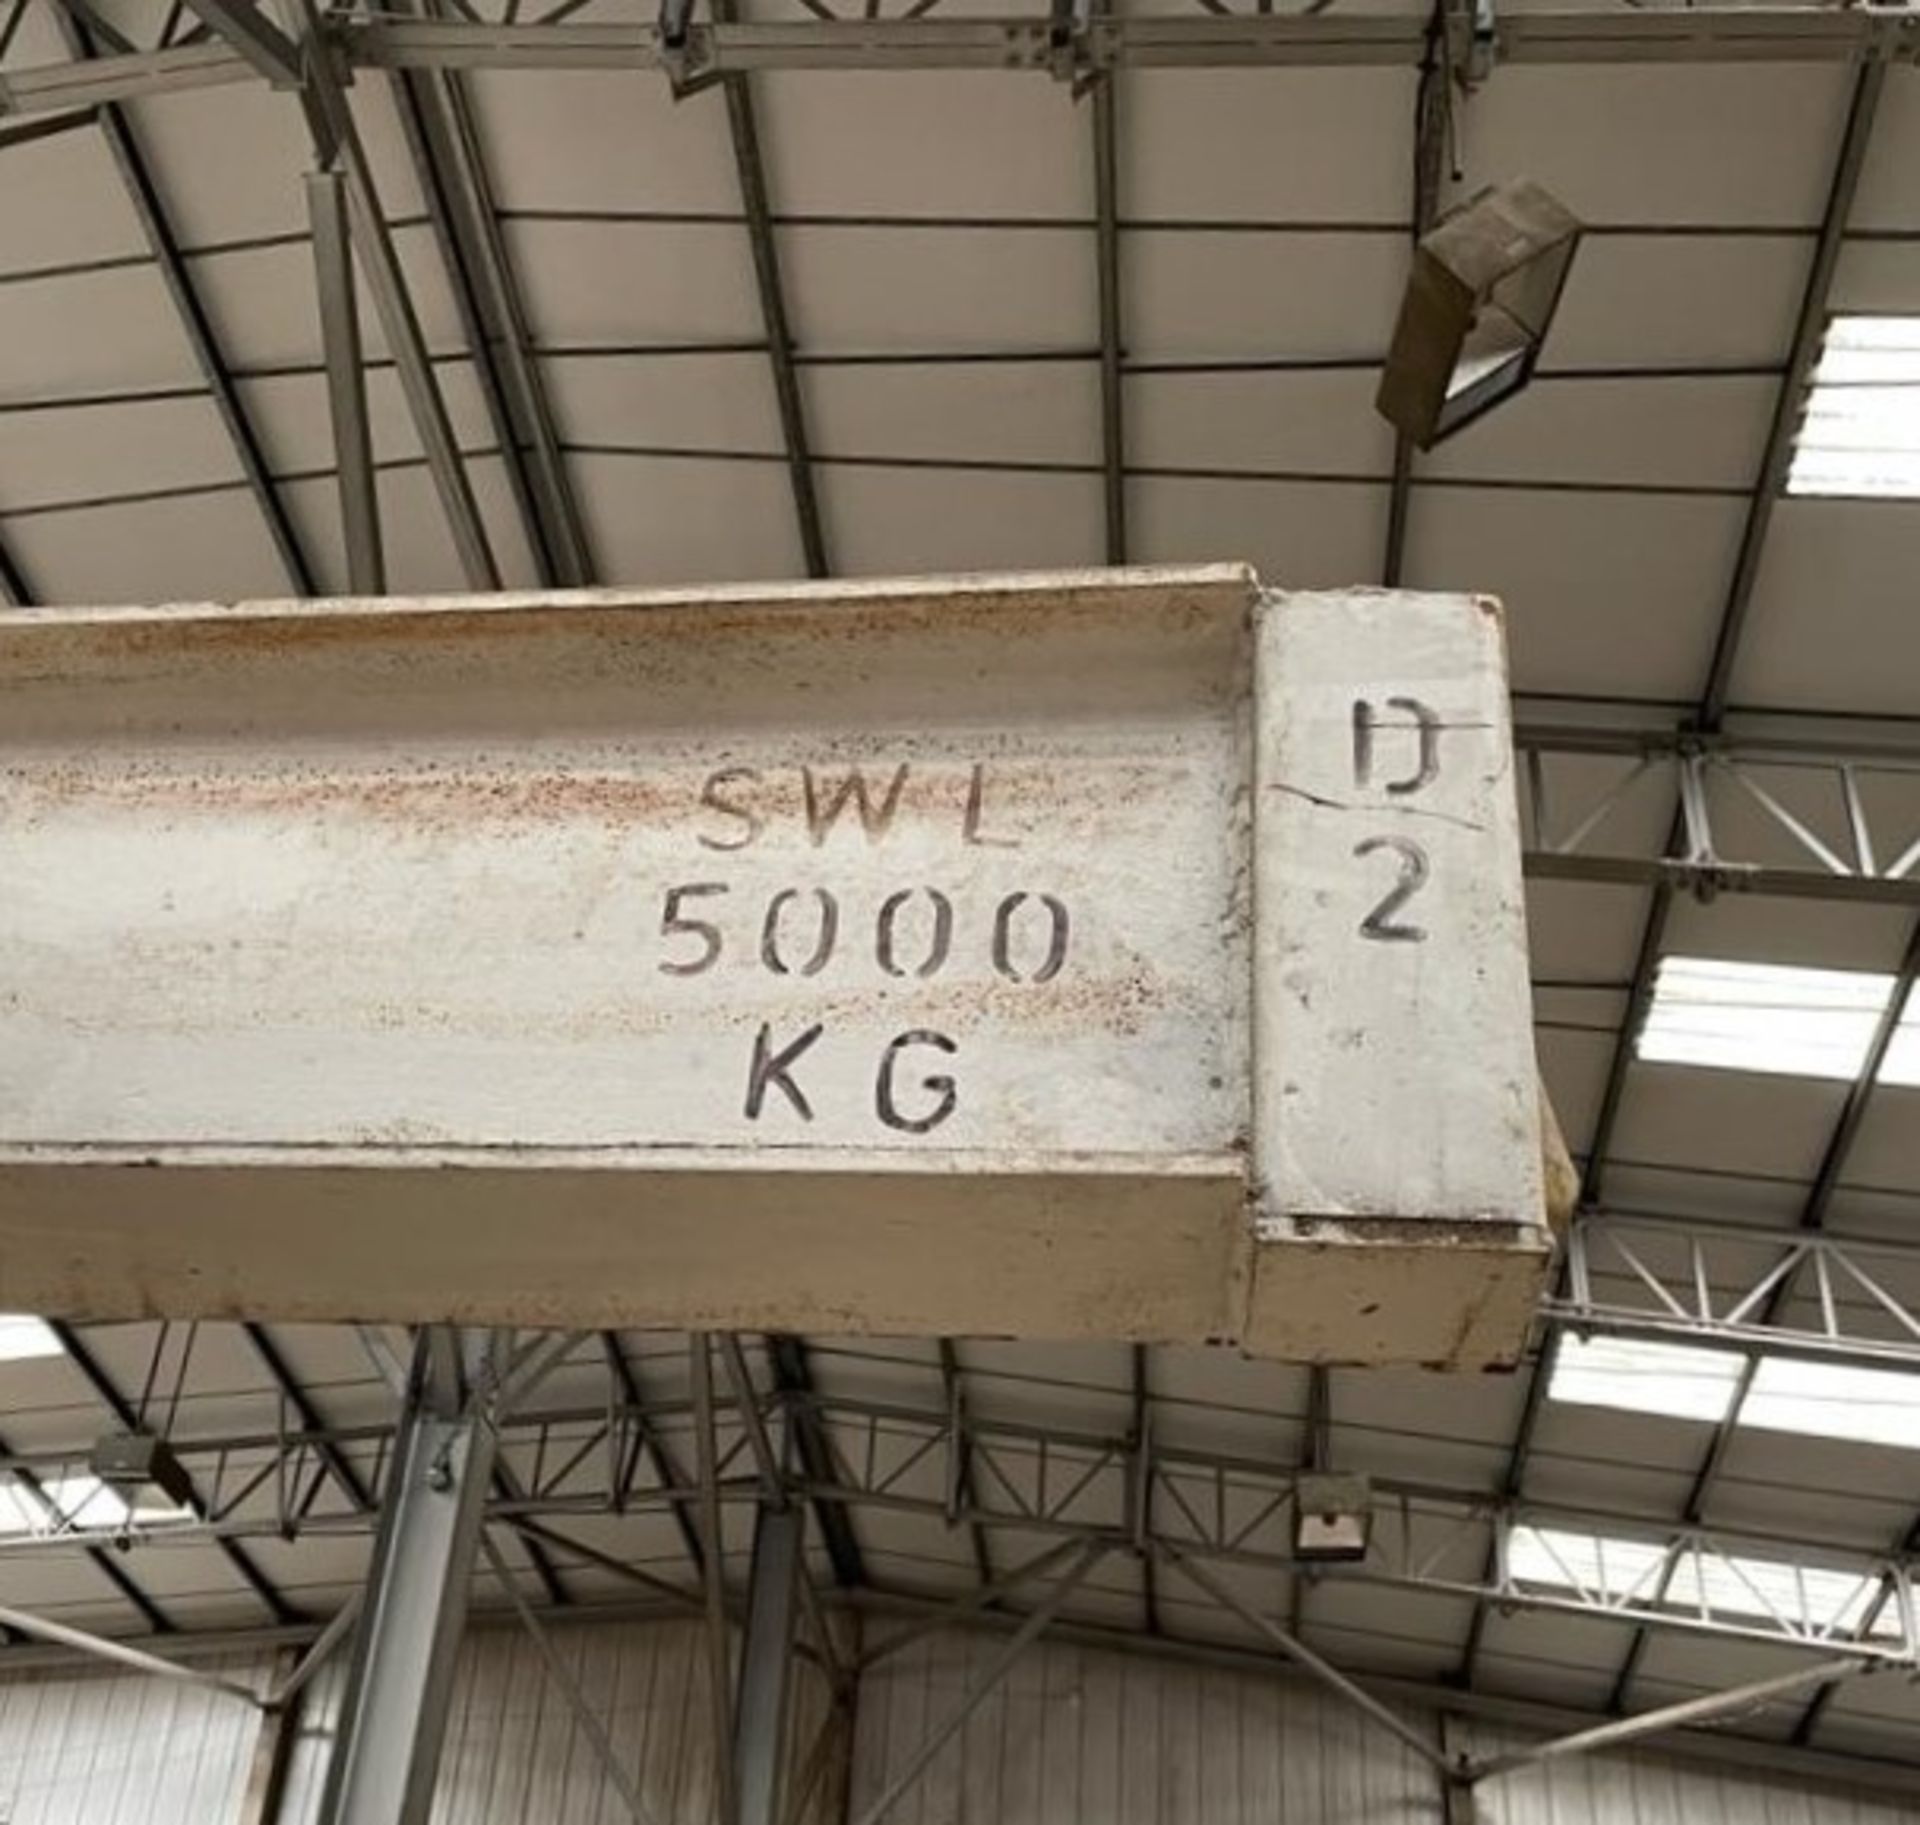 2 x Heavy Duty Cantilever Racking Uprights - SWL 5000kg - Ideal For Builders Merchants or Warehouses - Image 7 of 8